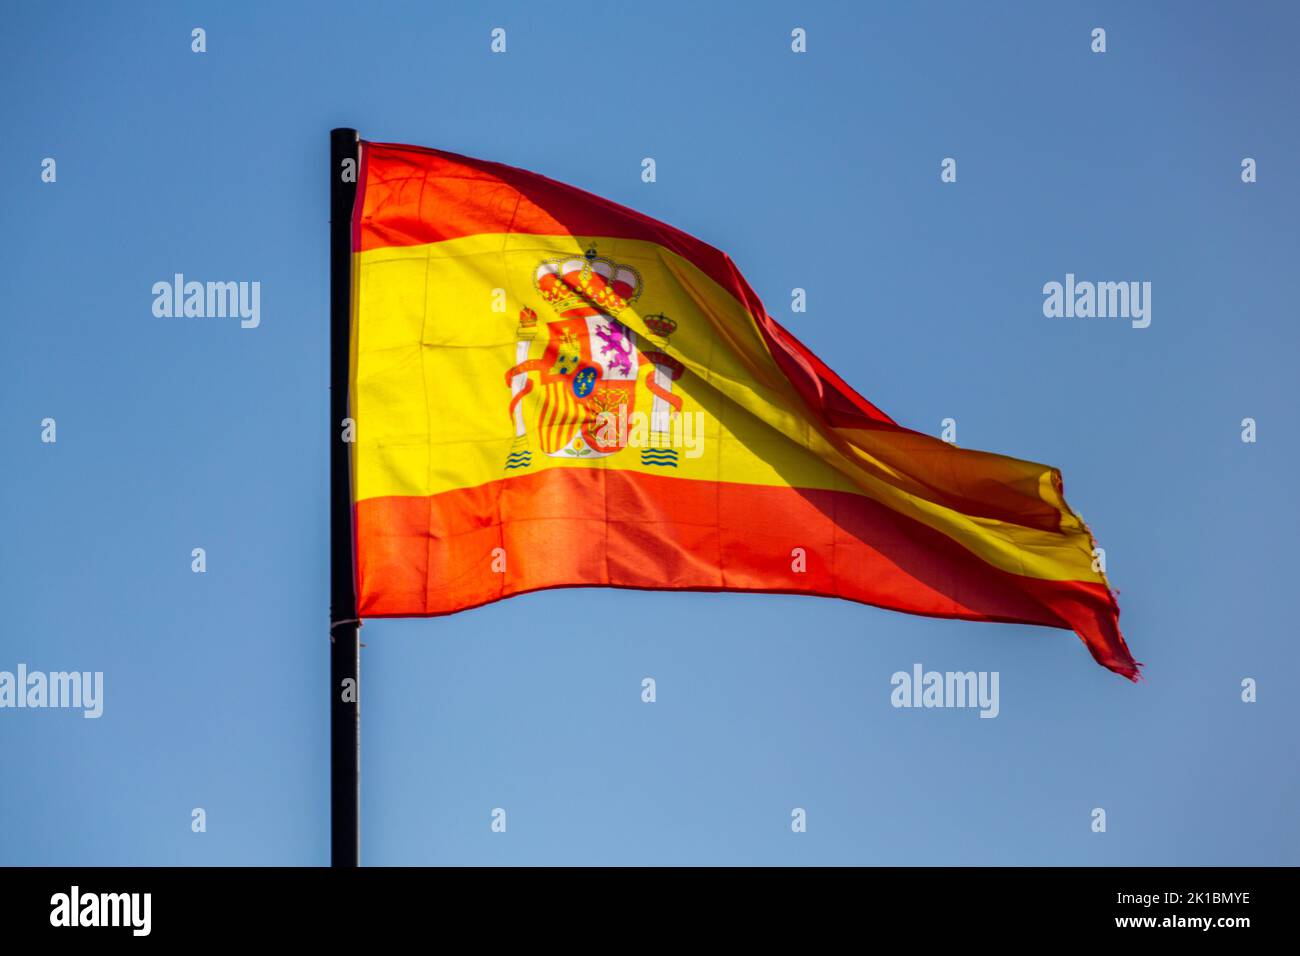 The national flag of Spain waving in a blue sky Stock Photo